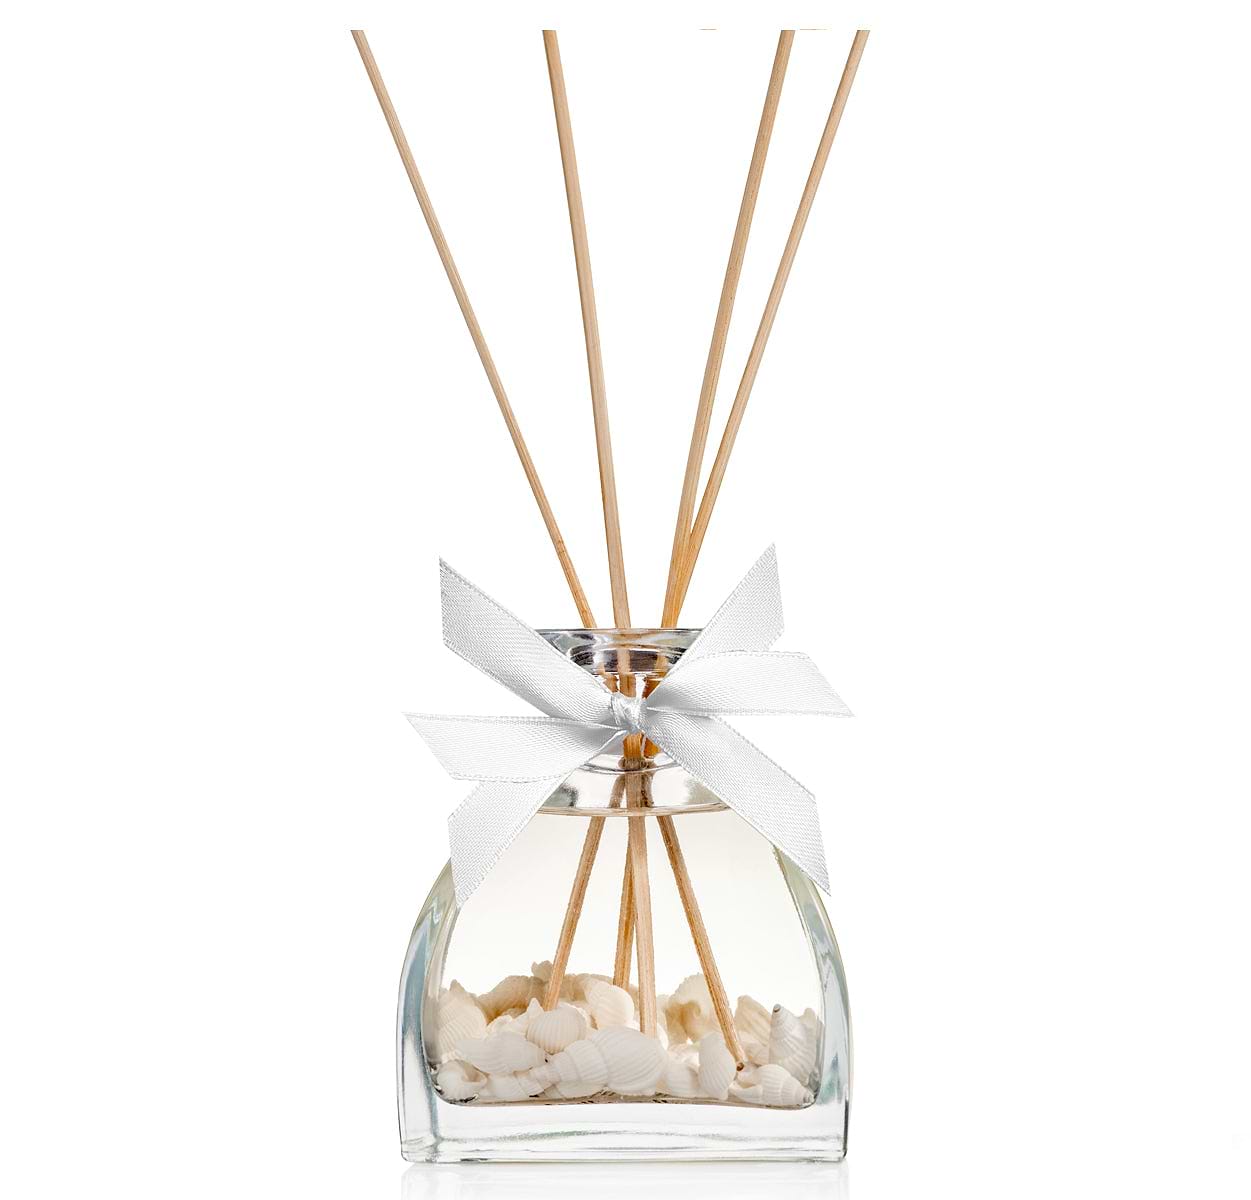 SPRING Fragrance Reed Diffuser Set | 5.07oz (150ml) | Fragrance Made in France | Home Décor | Scented Aromatic Oil | Room Air Freshener with Sea Shells & White Flower| Alcohol Free and VOC Compliant